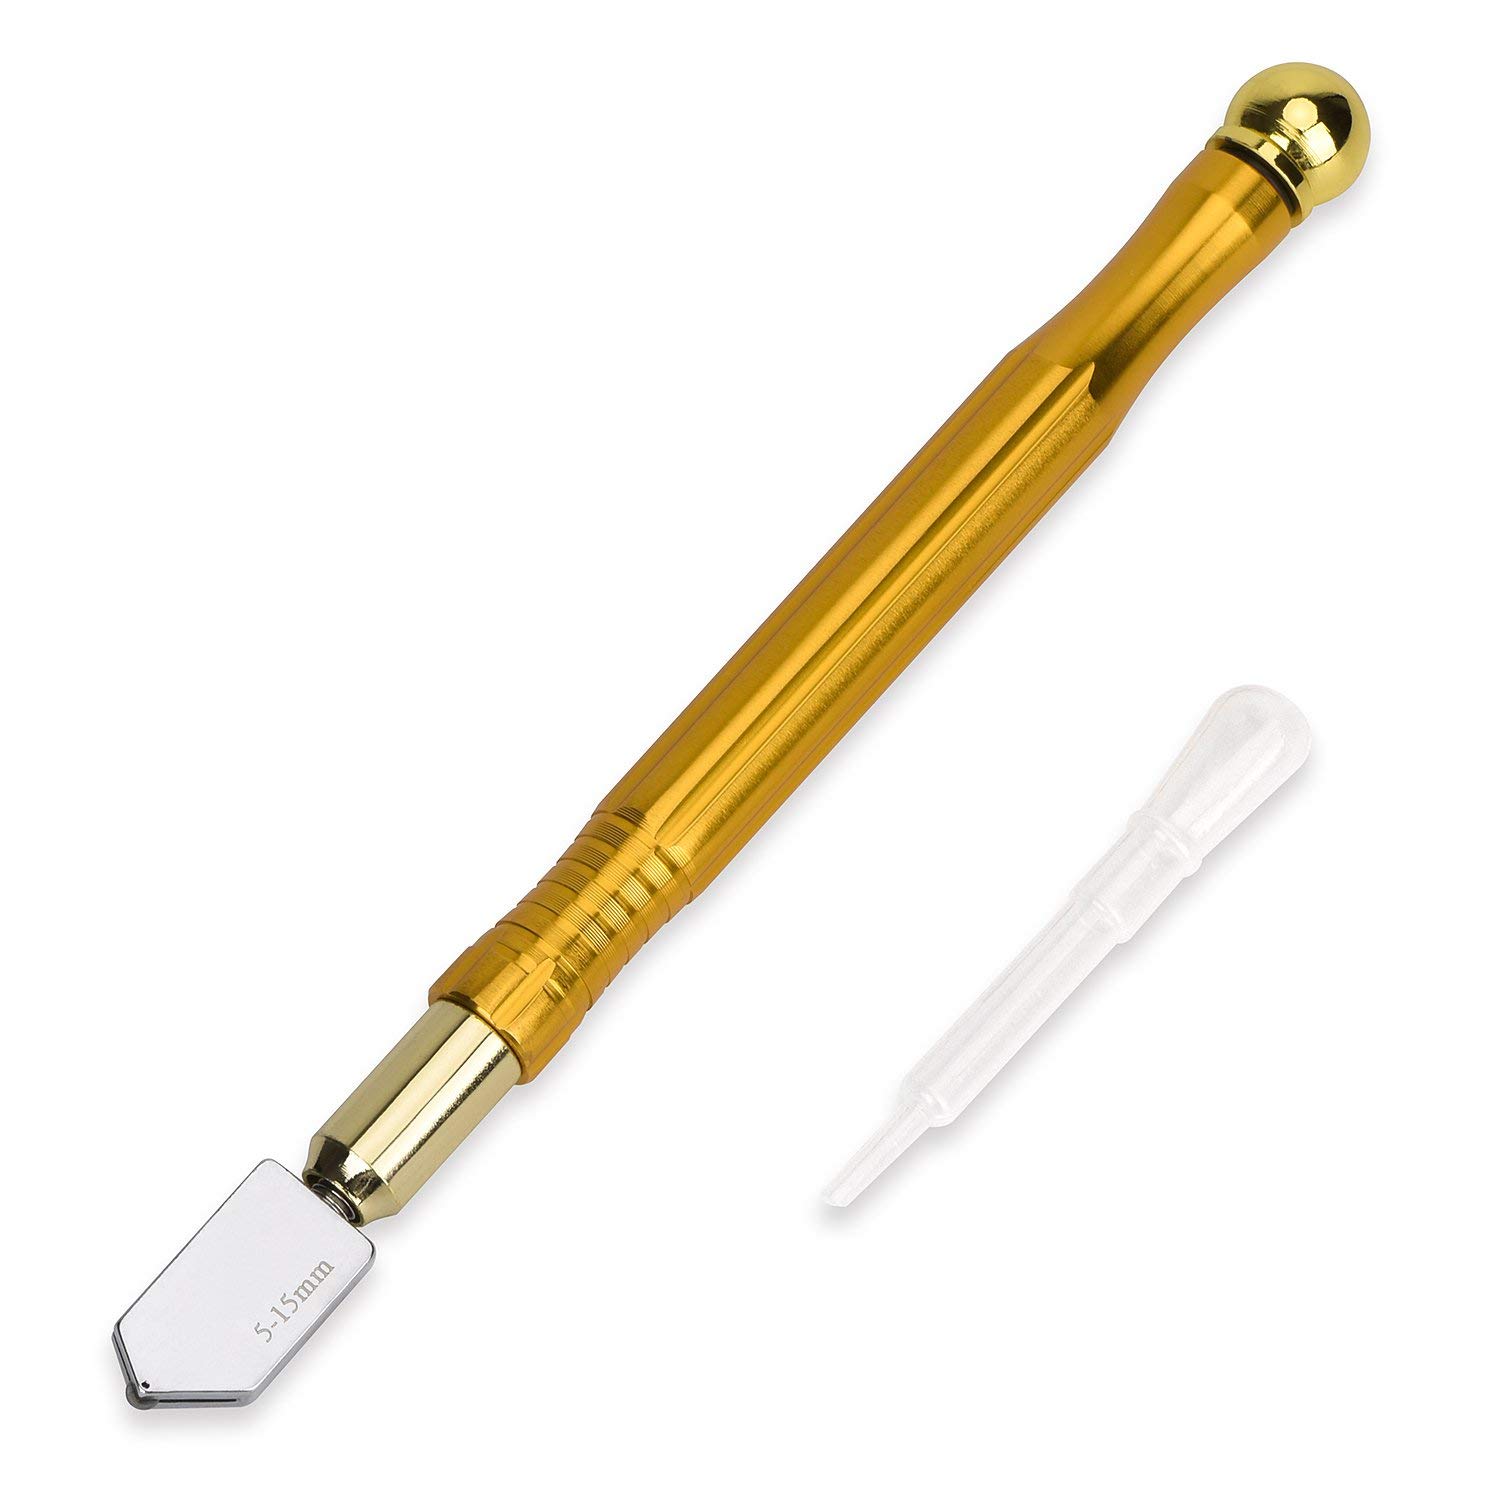 Adaone 5mm-15mm Metal Handle Pencil Style Oil Feed Tungsten Carbide Tip Glass Cutter Cutting Tools, Mosaic/Tiles/Stained Glass Cutting Tool(Gold)